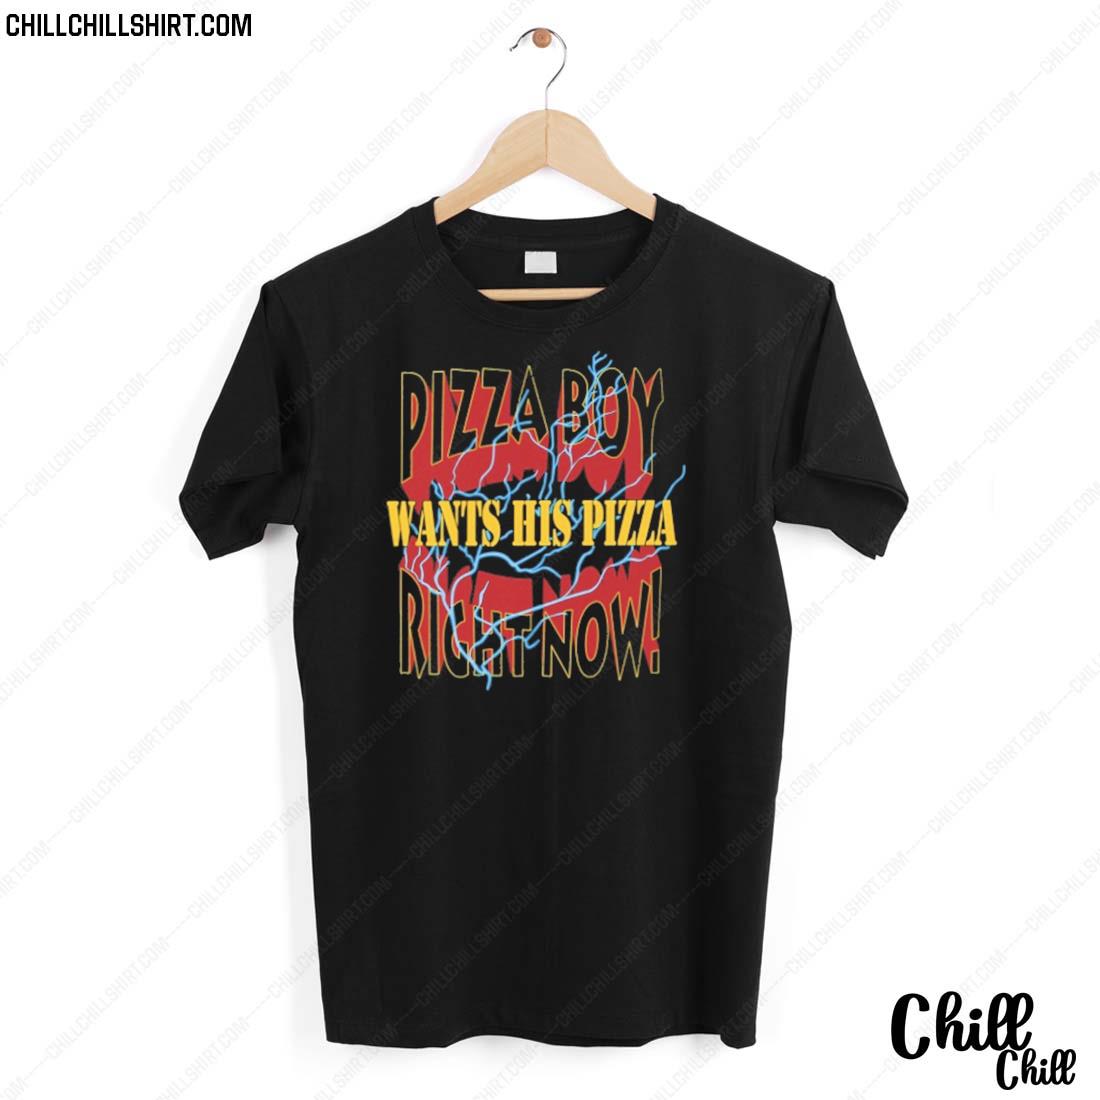 Nice pizza Boy Want His Pizza Right Now T-shirt